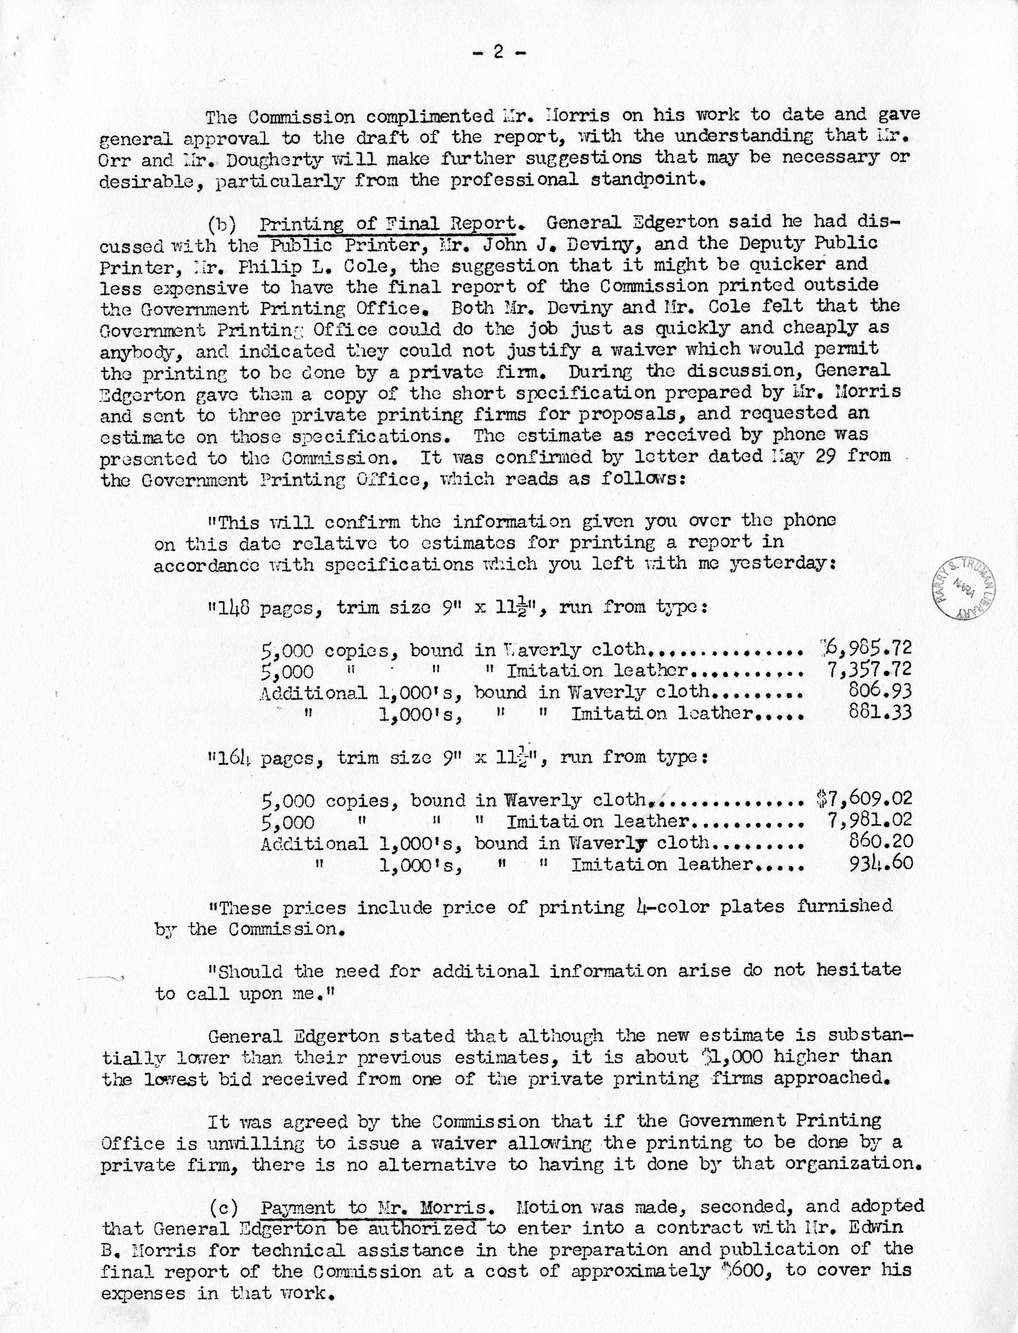 Minutes of the Seventieth Meeting of the Commission On Renovation of the Executive Mansion